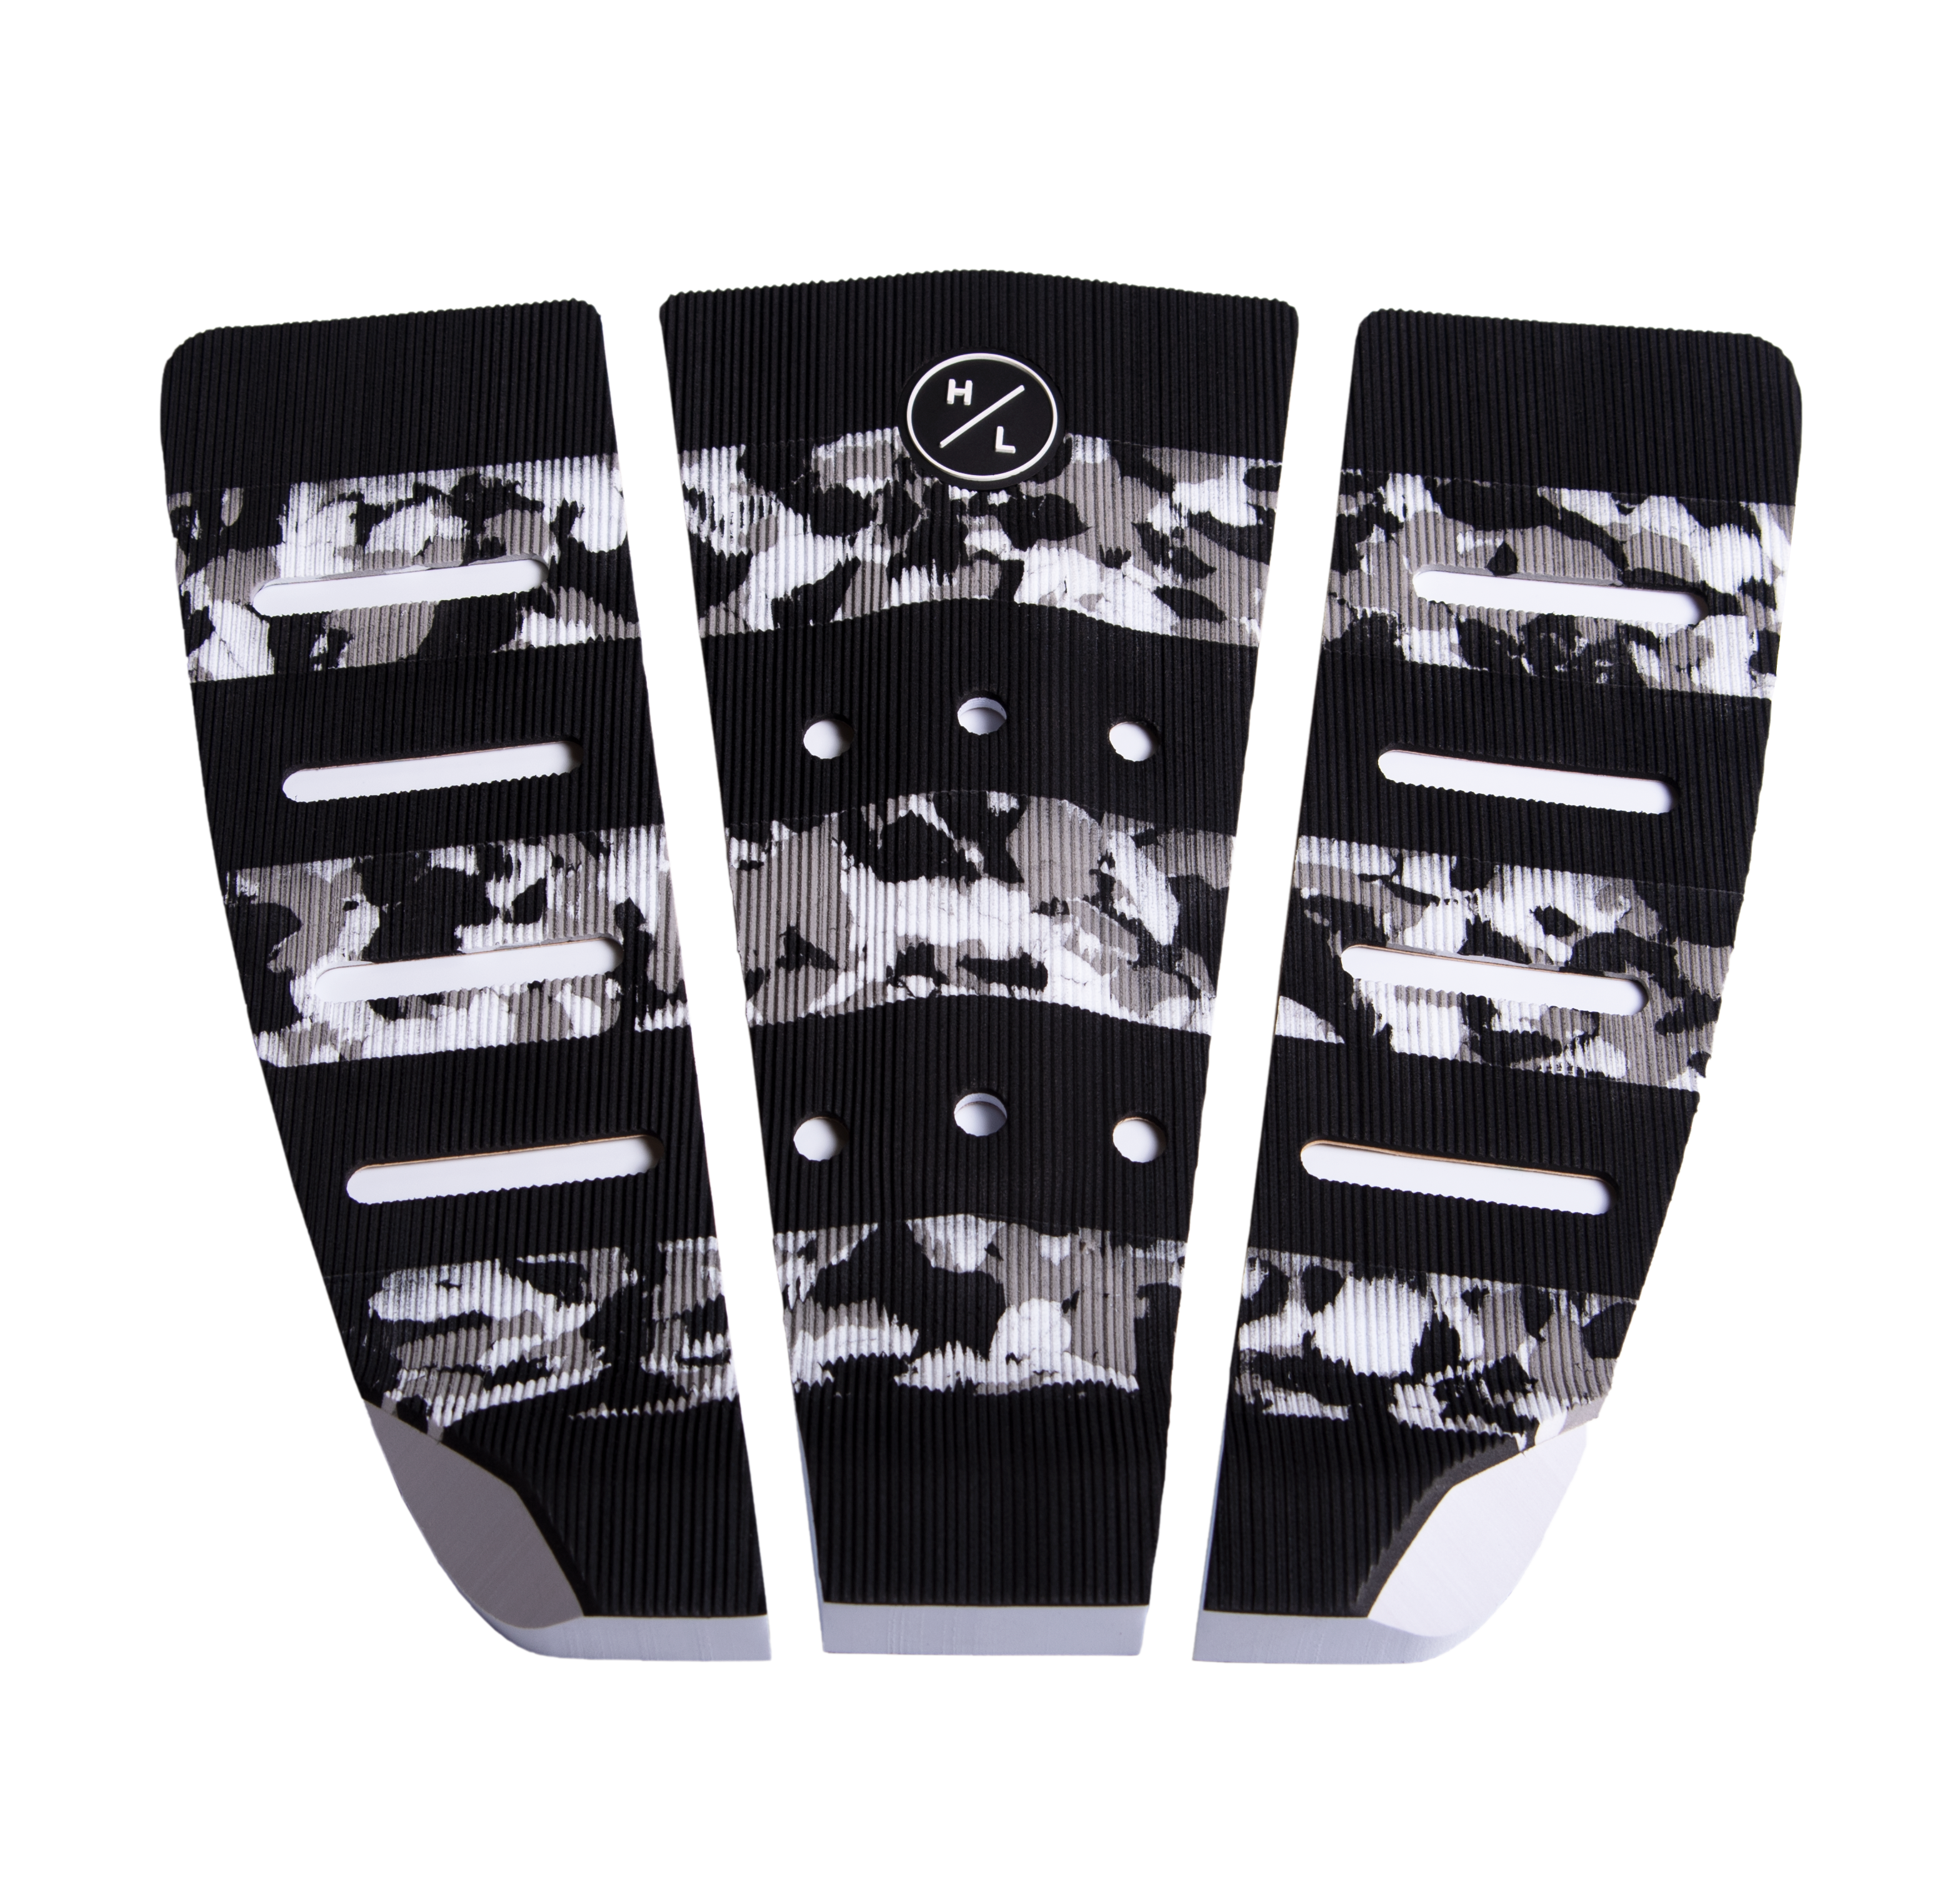 A set of black and white Hyperlite Corduroy Rear Traction Pads featuring a grippy Hyperlite Corduroy Rear Traction Pad.